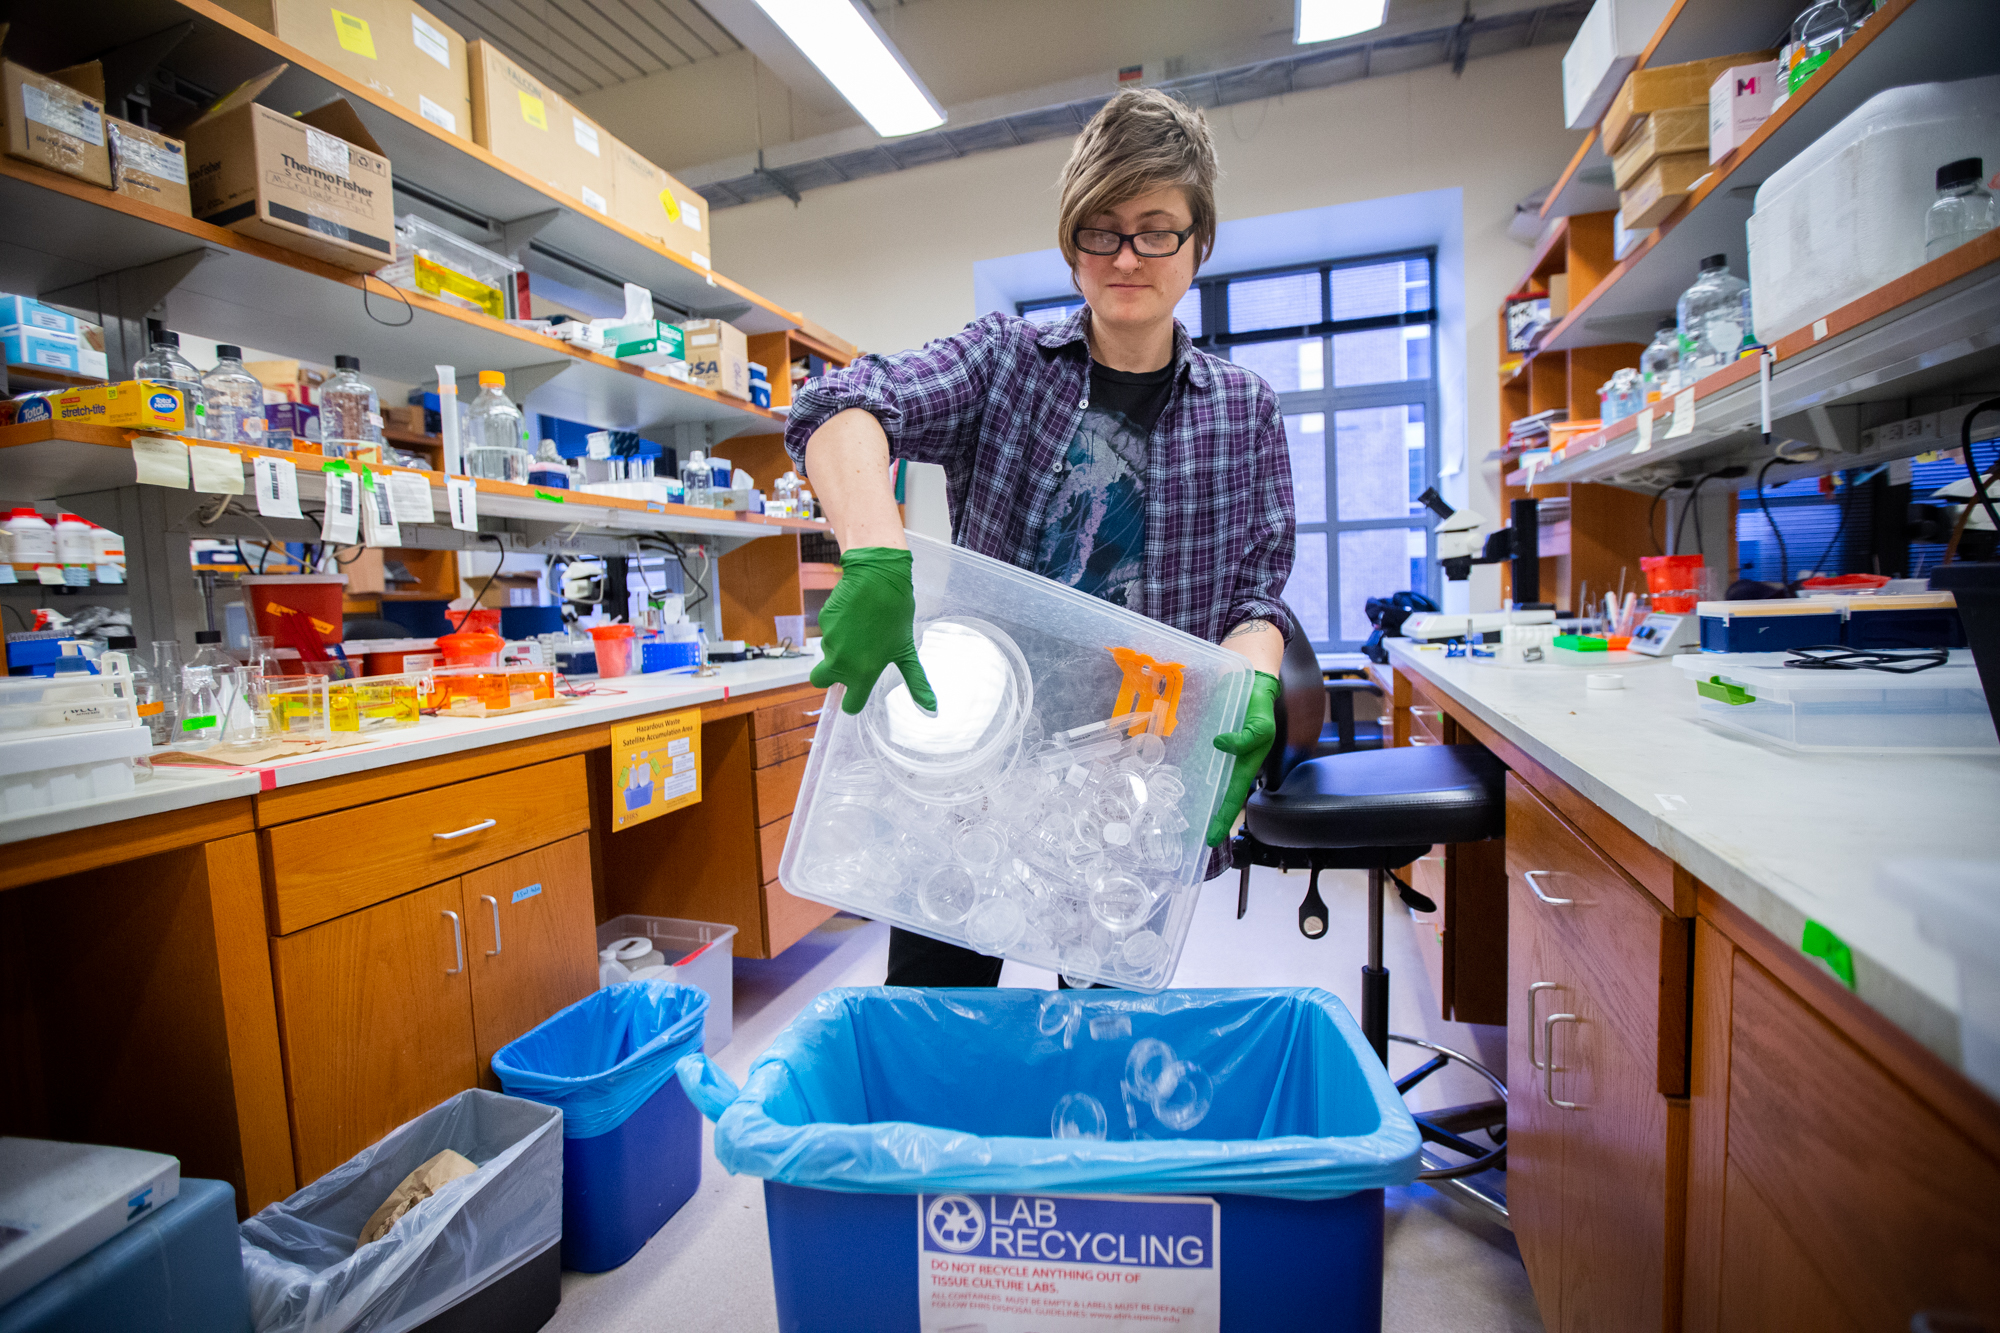 A person in a lab pours a bin full of plastic petri dishes into a blue recycling bin.